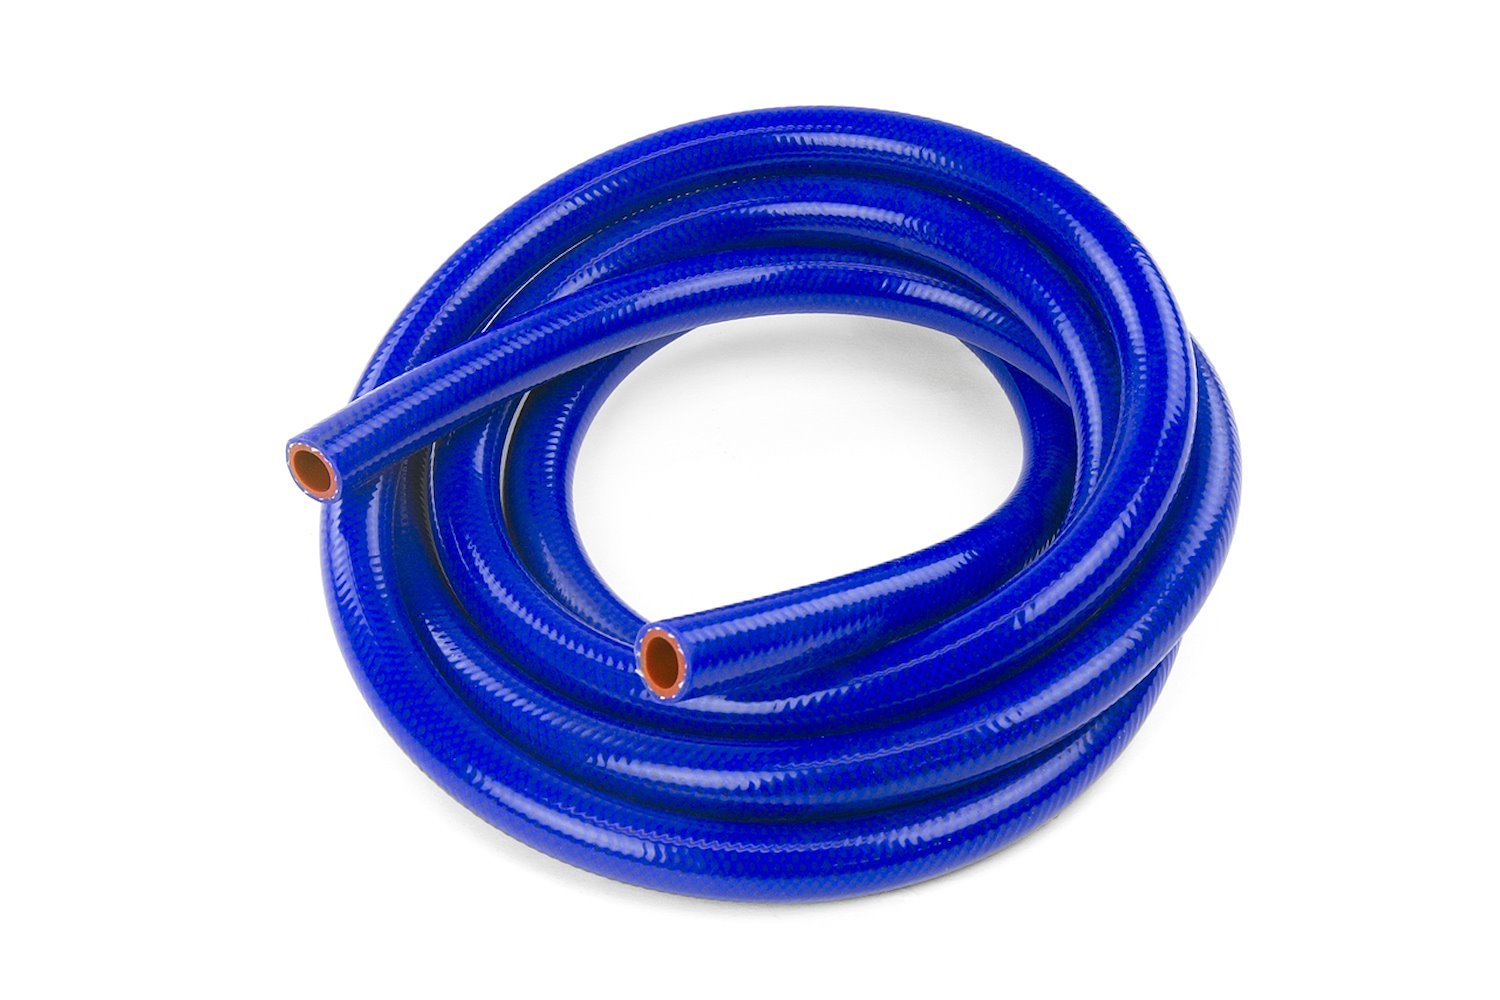 HTHH-075-BLUEx10 Silicone Heater Hose Tubing, High-Temp 1-Ply Reinforced, 3/4 in. ID, 10 ft. Roll, Blue